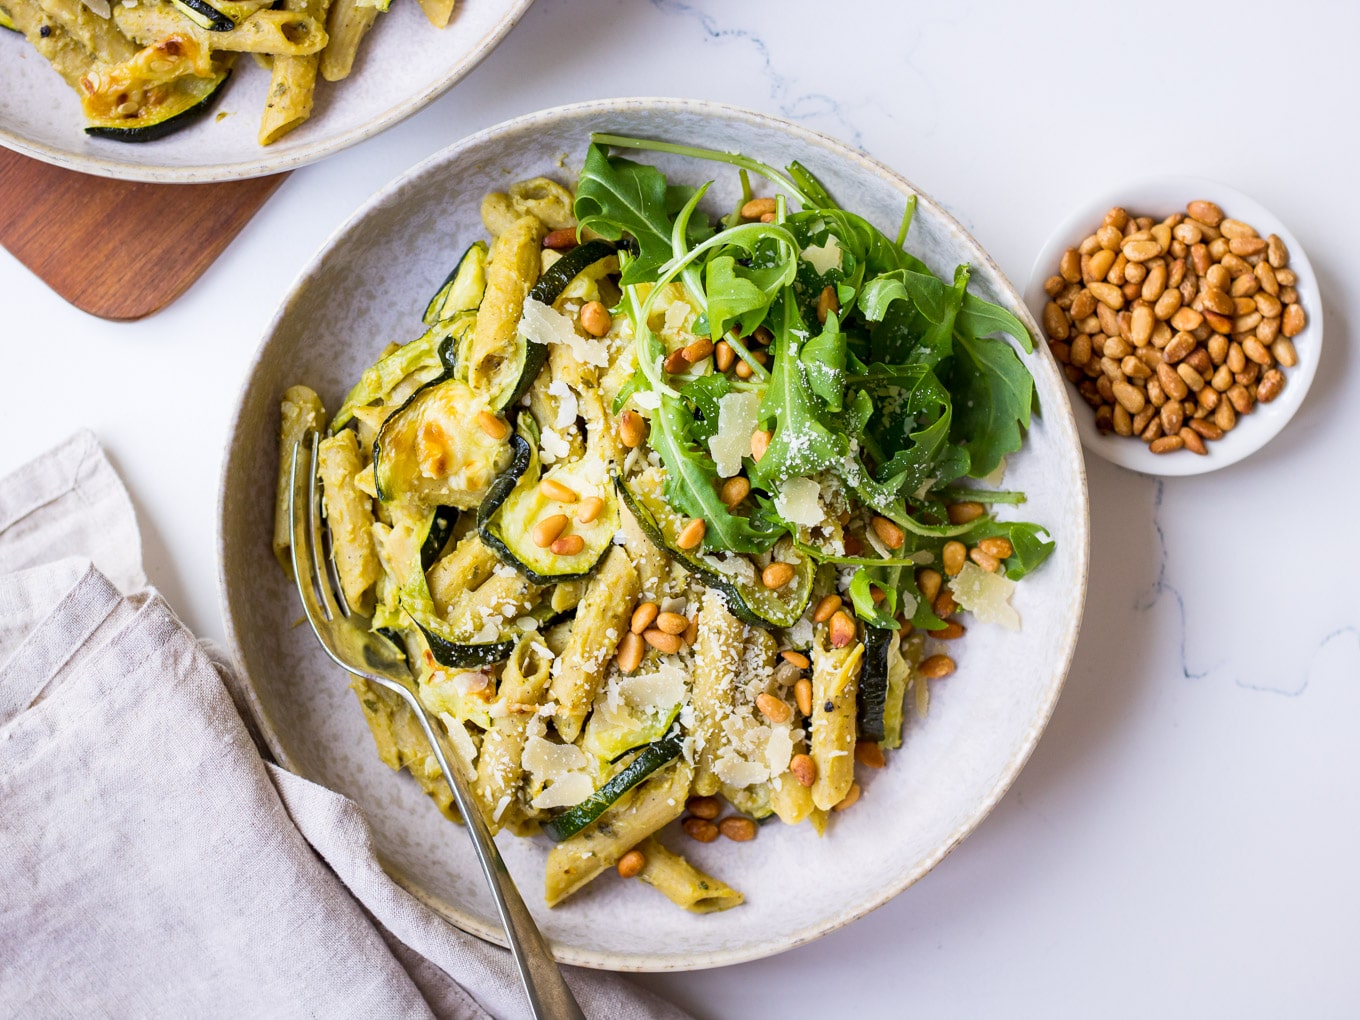 Pesto Pulse Pasta with Roasted Zucchini served in a grey ceramic bowl, with pine nuts